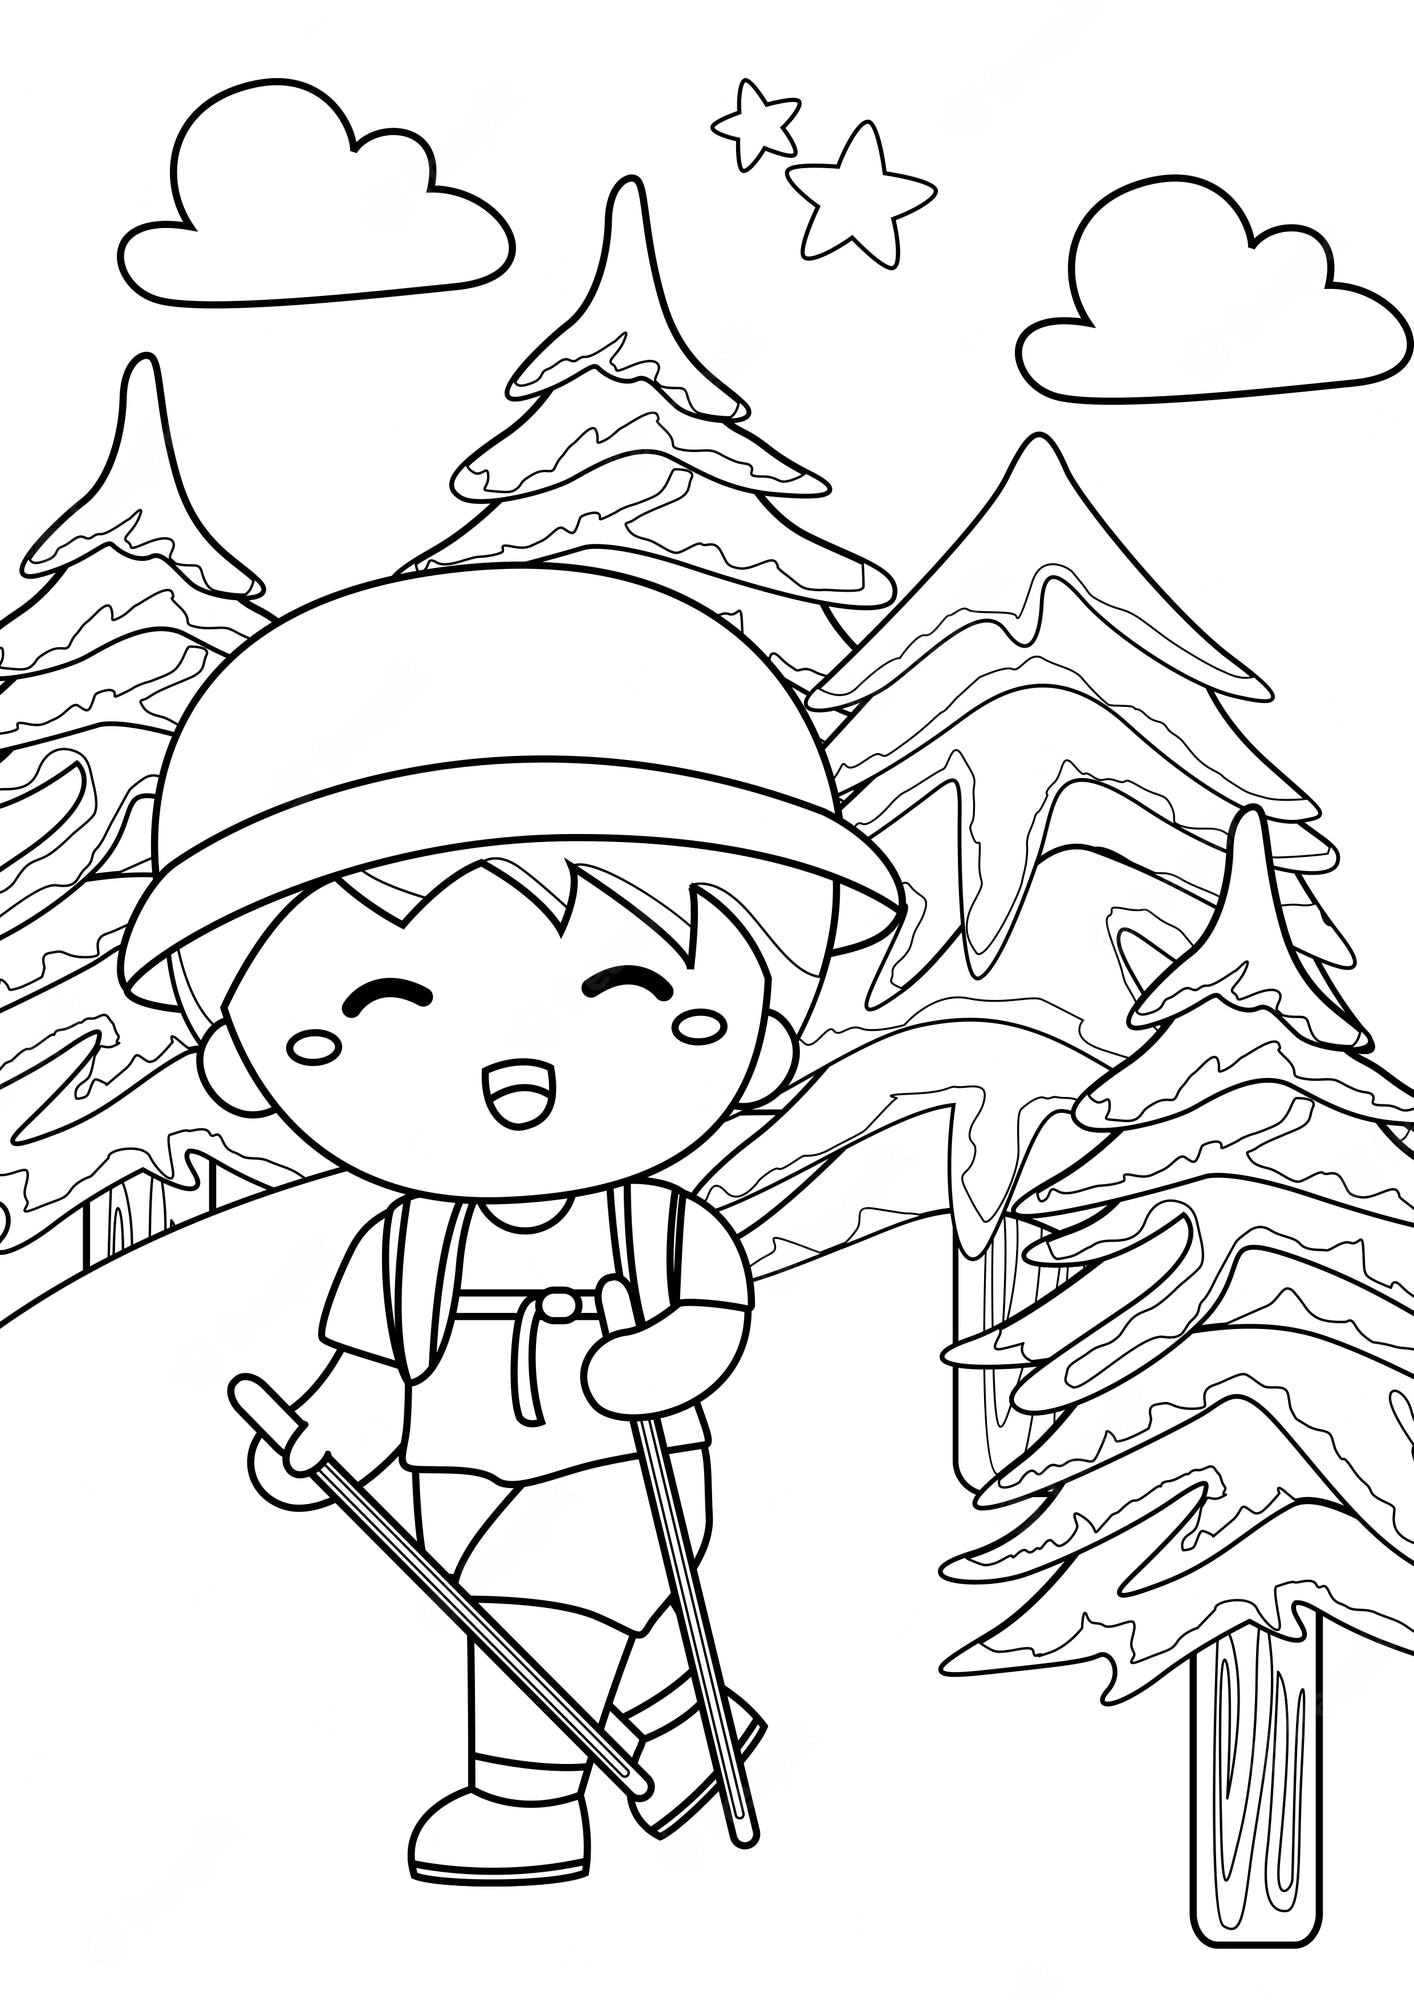 Premium Vector | Coloring pages for kids a4 page hiking adventure camping  theme